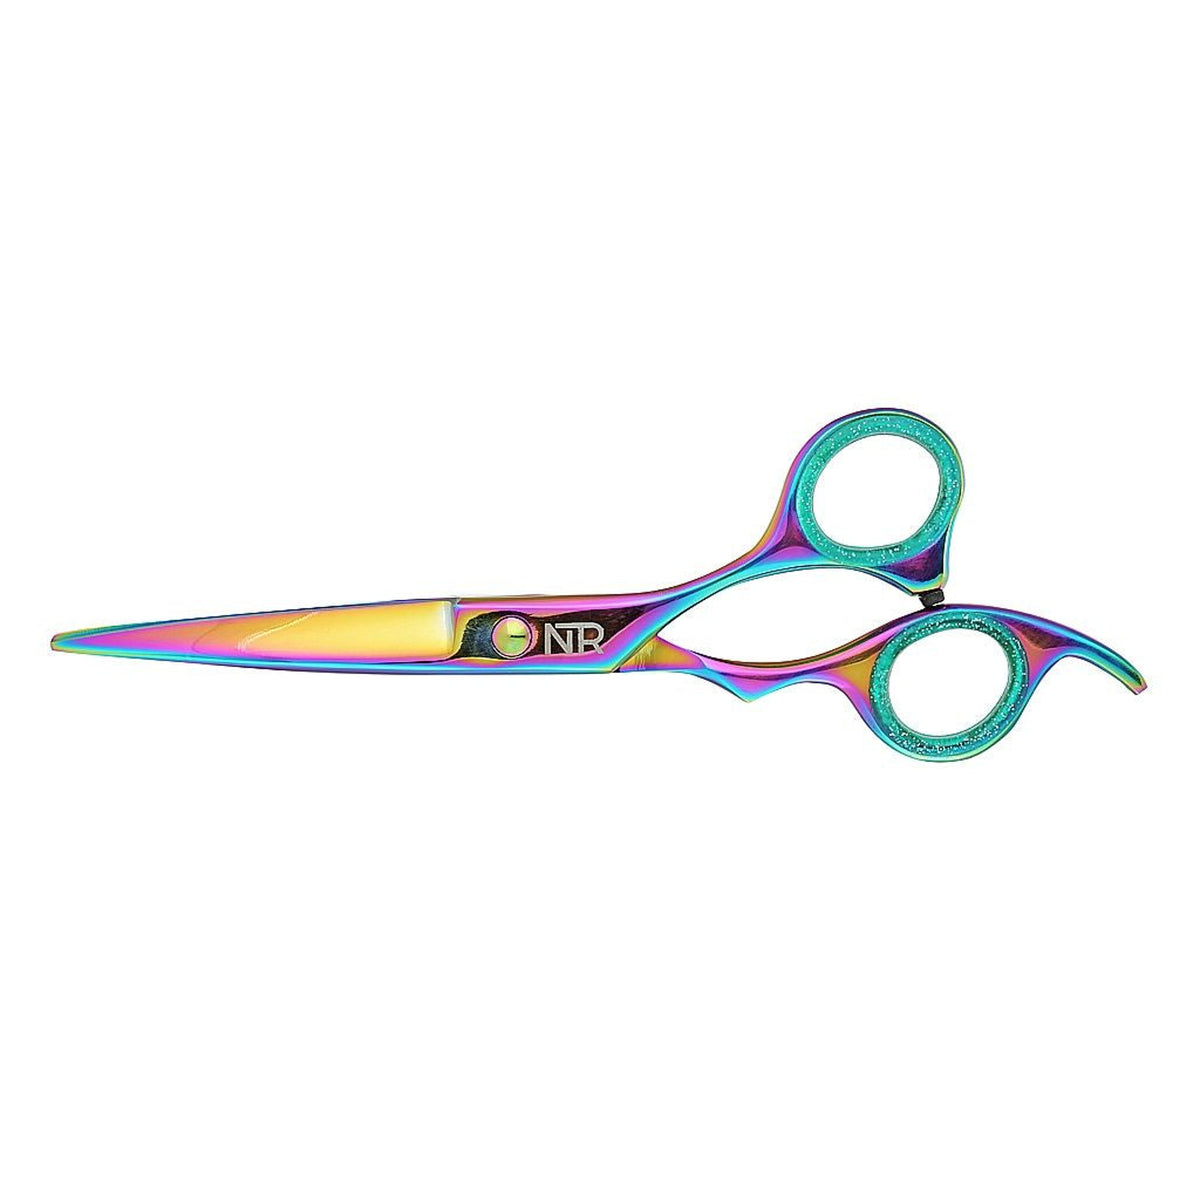 Rainbow holographic trimming scissors with silicone casing the finger holds.